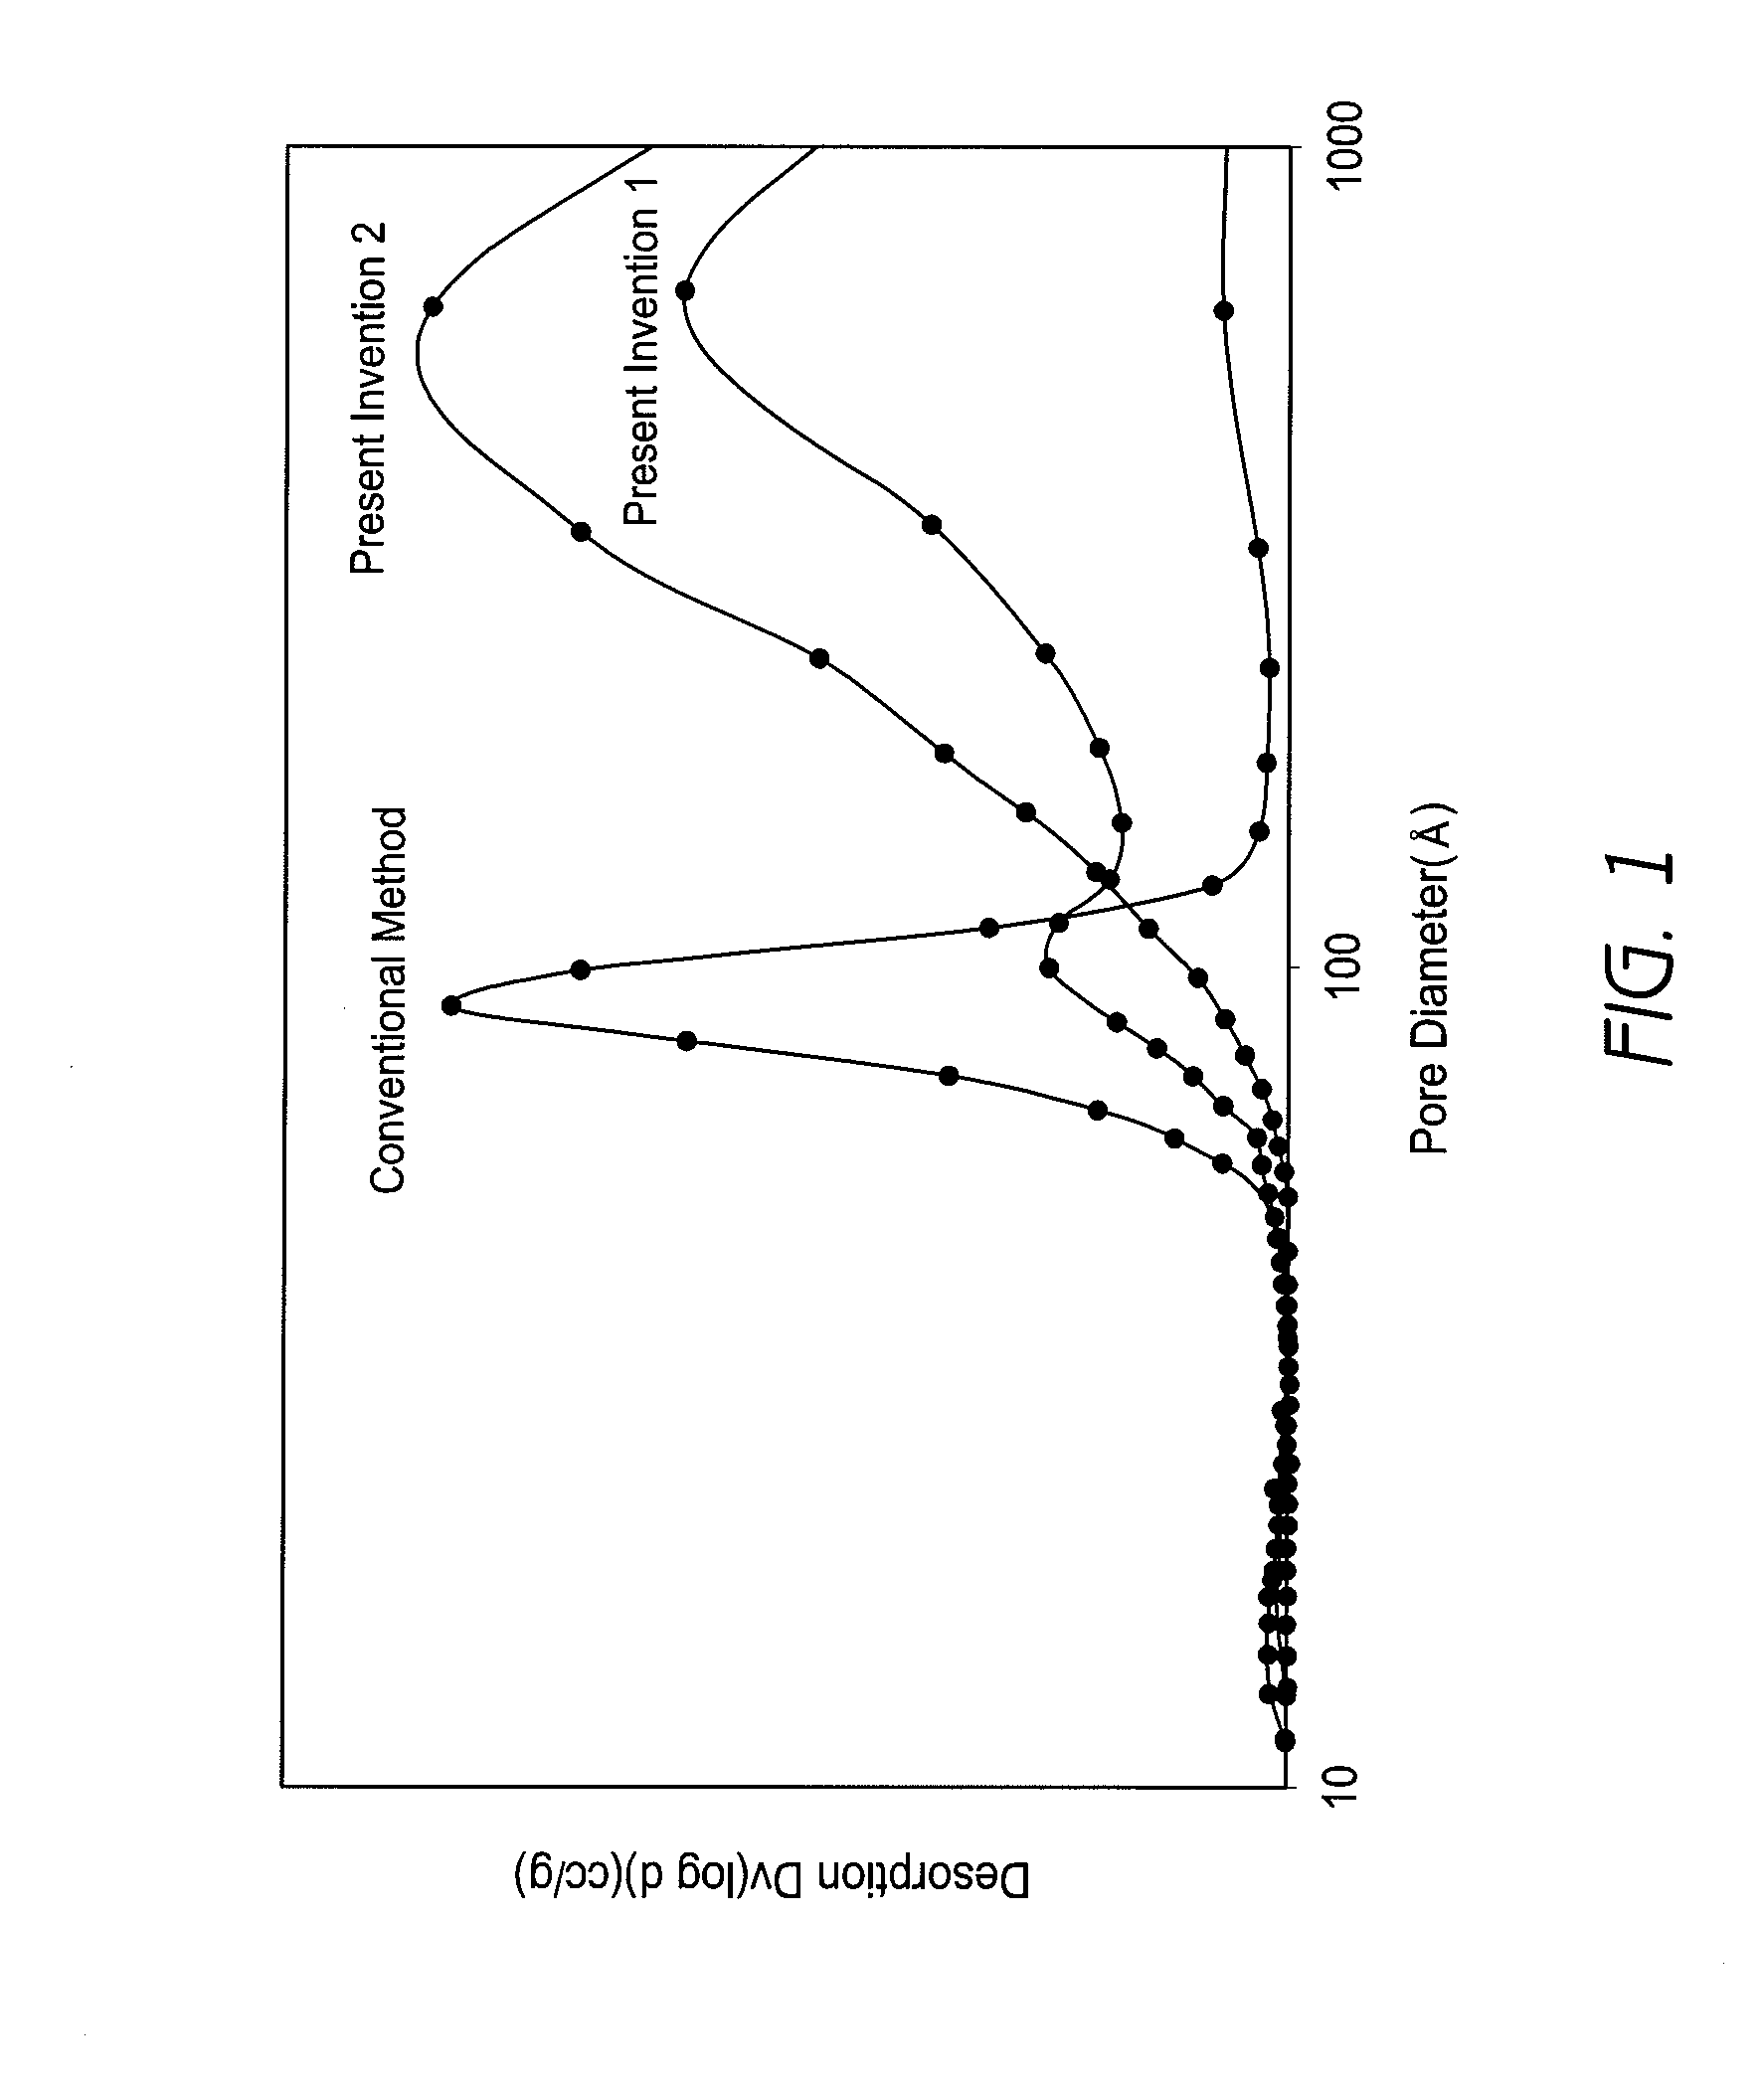 Zirconia porous body and manufacturing method thereof